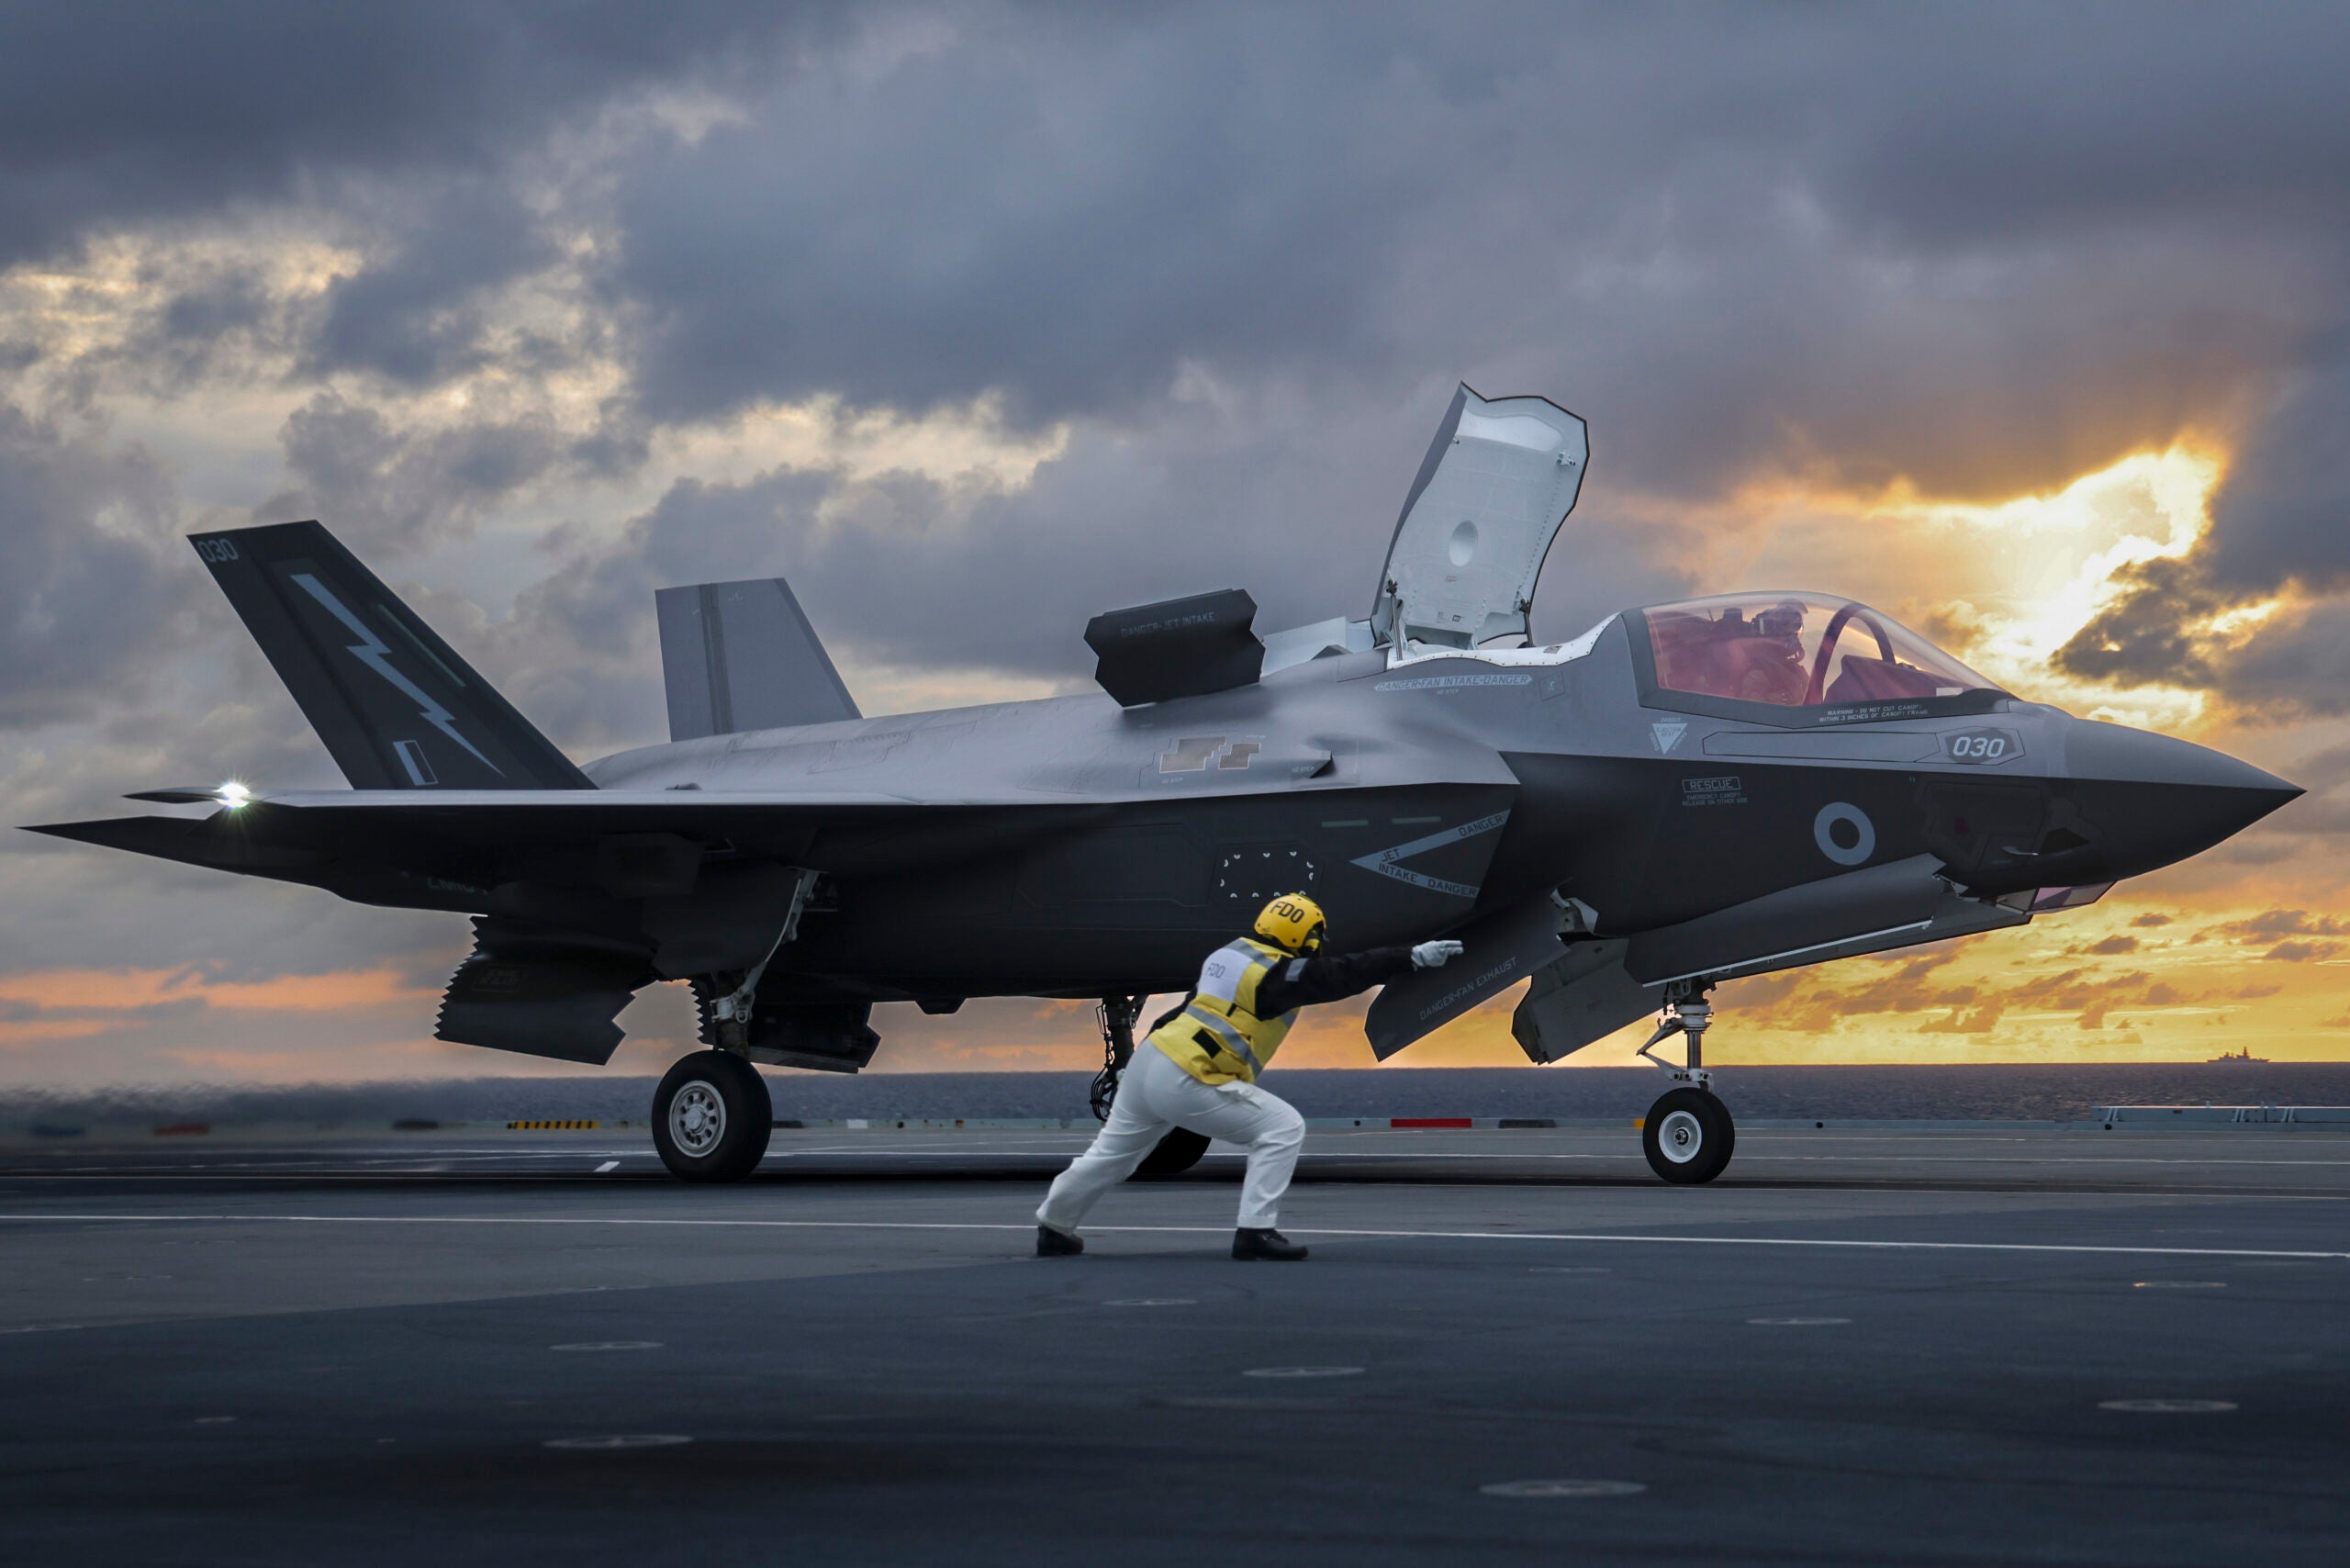 Pictured: A F-35Bs conducting carrier qualifications on HMS Queen Elizabeth.

On 11th September HMS Queen Elizabeth embarked eight F-35B Lightning jets from 617 Squadron ("The Dambusters"), based at RAF Marham. The jets will conduct Carrier Qualifications (CQs) before continuing Carrier Strike Group operations.

HMS Queen Elizabeth will work with NATO and Joint Expeditionary Force (JEF) nations  ten like-minded countries comprising Norway, Denmark, Finland, Estonia, Iceland, Latvia, Lithuania, the Netherlands, and Sweden, dedicated to stability and security in the Baltic region.






 *** Local Caption *** 617 SQUADRON LIGHTNIG JETS EMBARK ON AIRCRAFT CARRIER

On 11th September HMS Queen Elizabeth embarked eight F-35B Lightning jets from RAF Marham. The jets will conduct Carrier Qualifications (CQs) before continuing Carrier Strike Group operations.
HMS Queen Elizabeth will work with NATO and Joint Expeditionary Force (JEF) nations  ten like-minded countries comprising Norway, Denmark, Finland, Estonia, Iceland, Latvia, Lithuania, the Netherlands and Sweden, dedicated to stability and security in the Baltic region.